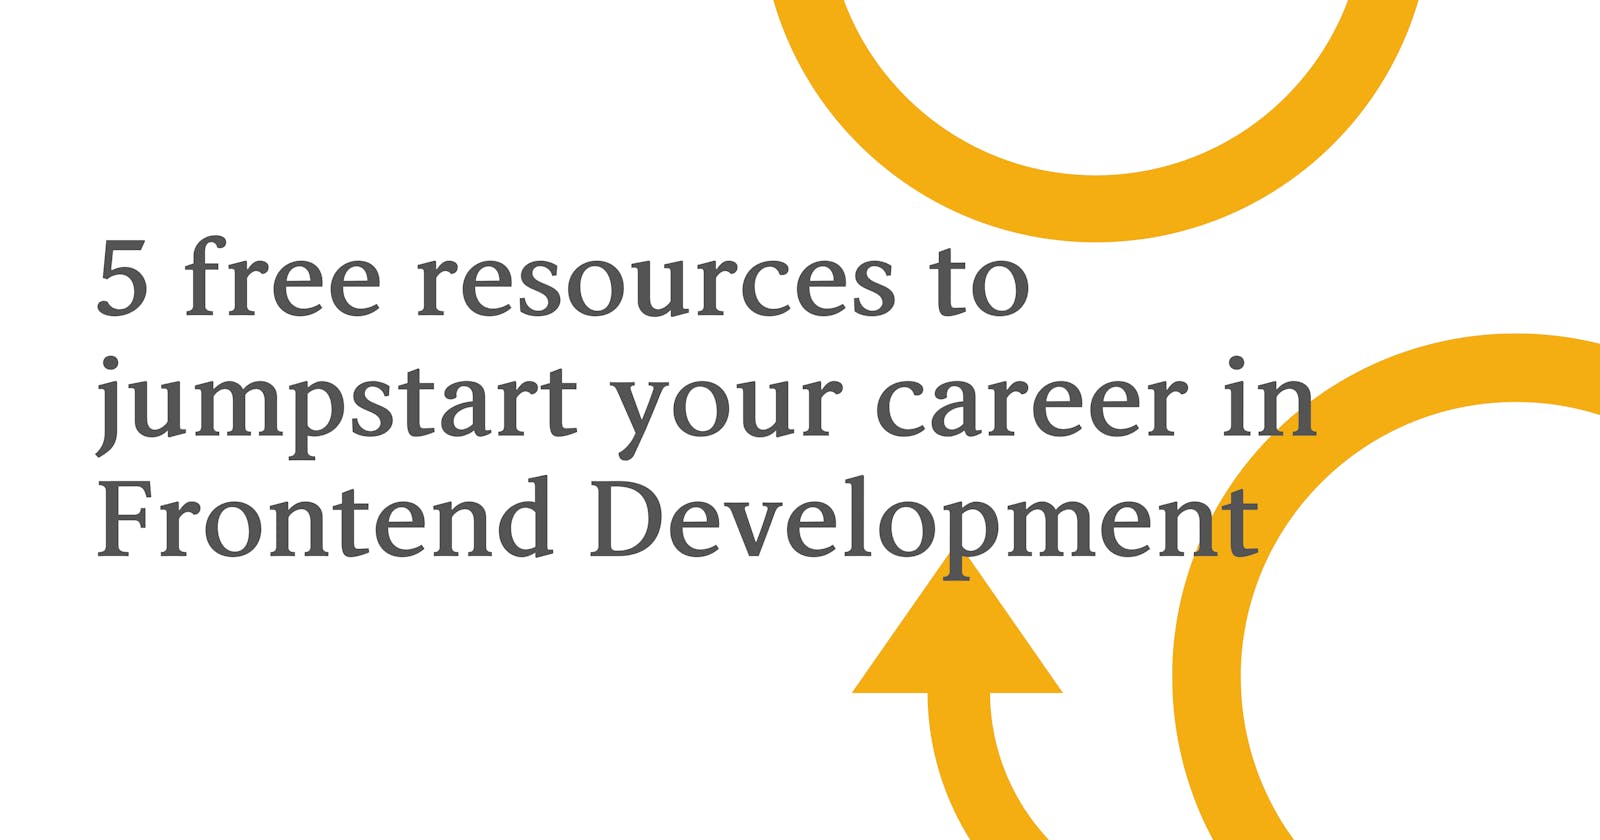 5 free resources to jumpstart your career in Frontend Development.